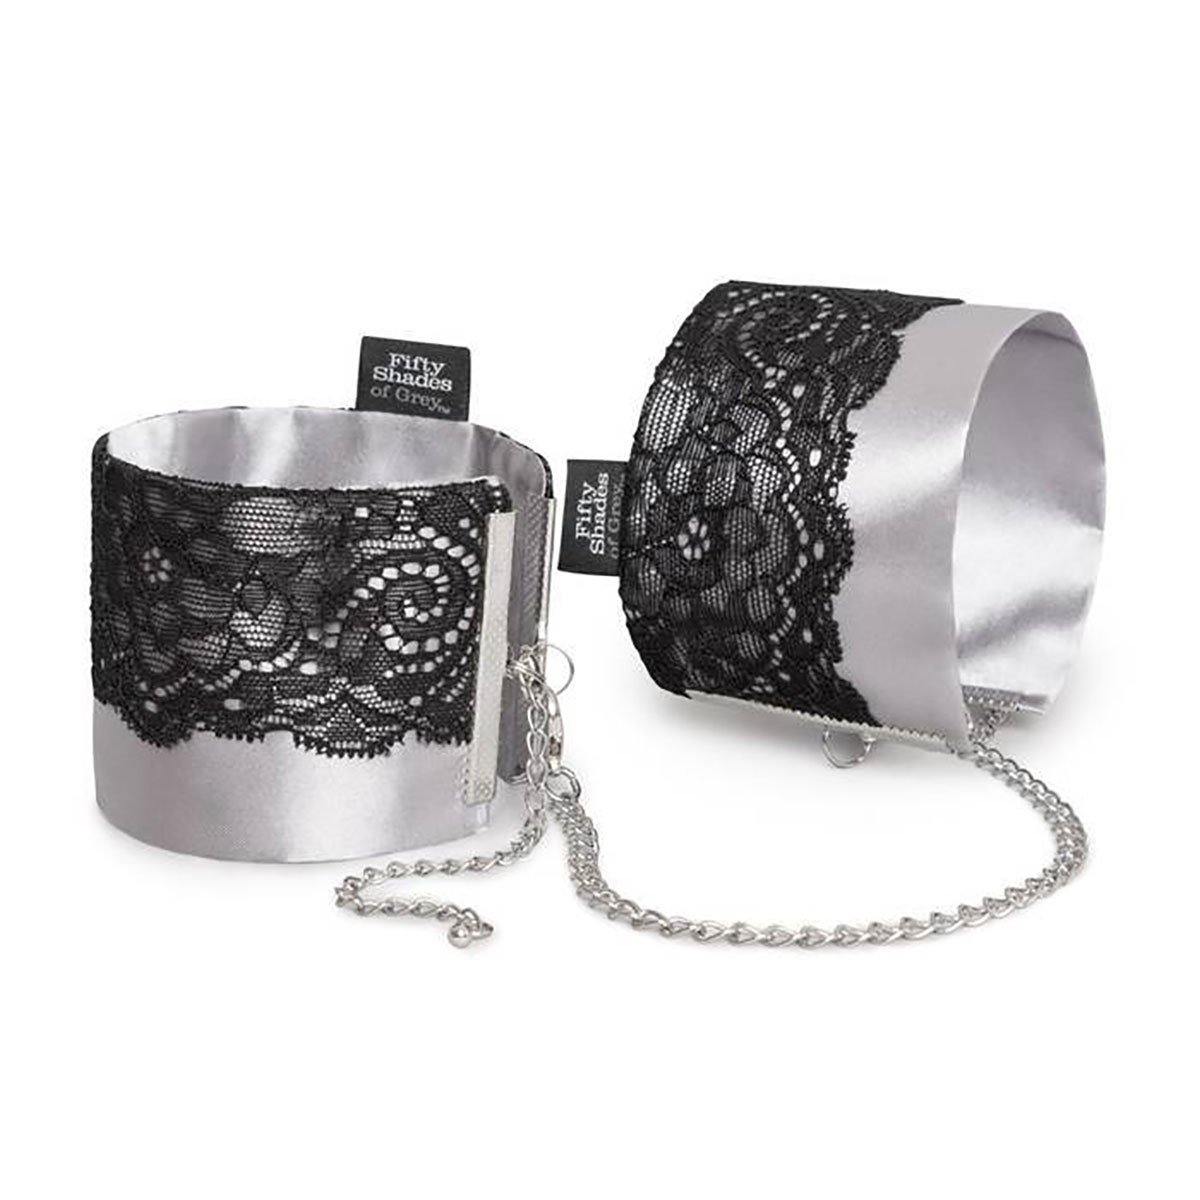 Fifty Shades - Play Nice Satin Wrist Cuff - Buy At Luxury Toy X - Free 3-Day Shipping